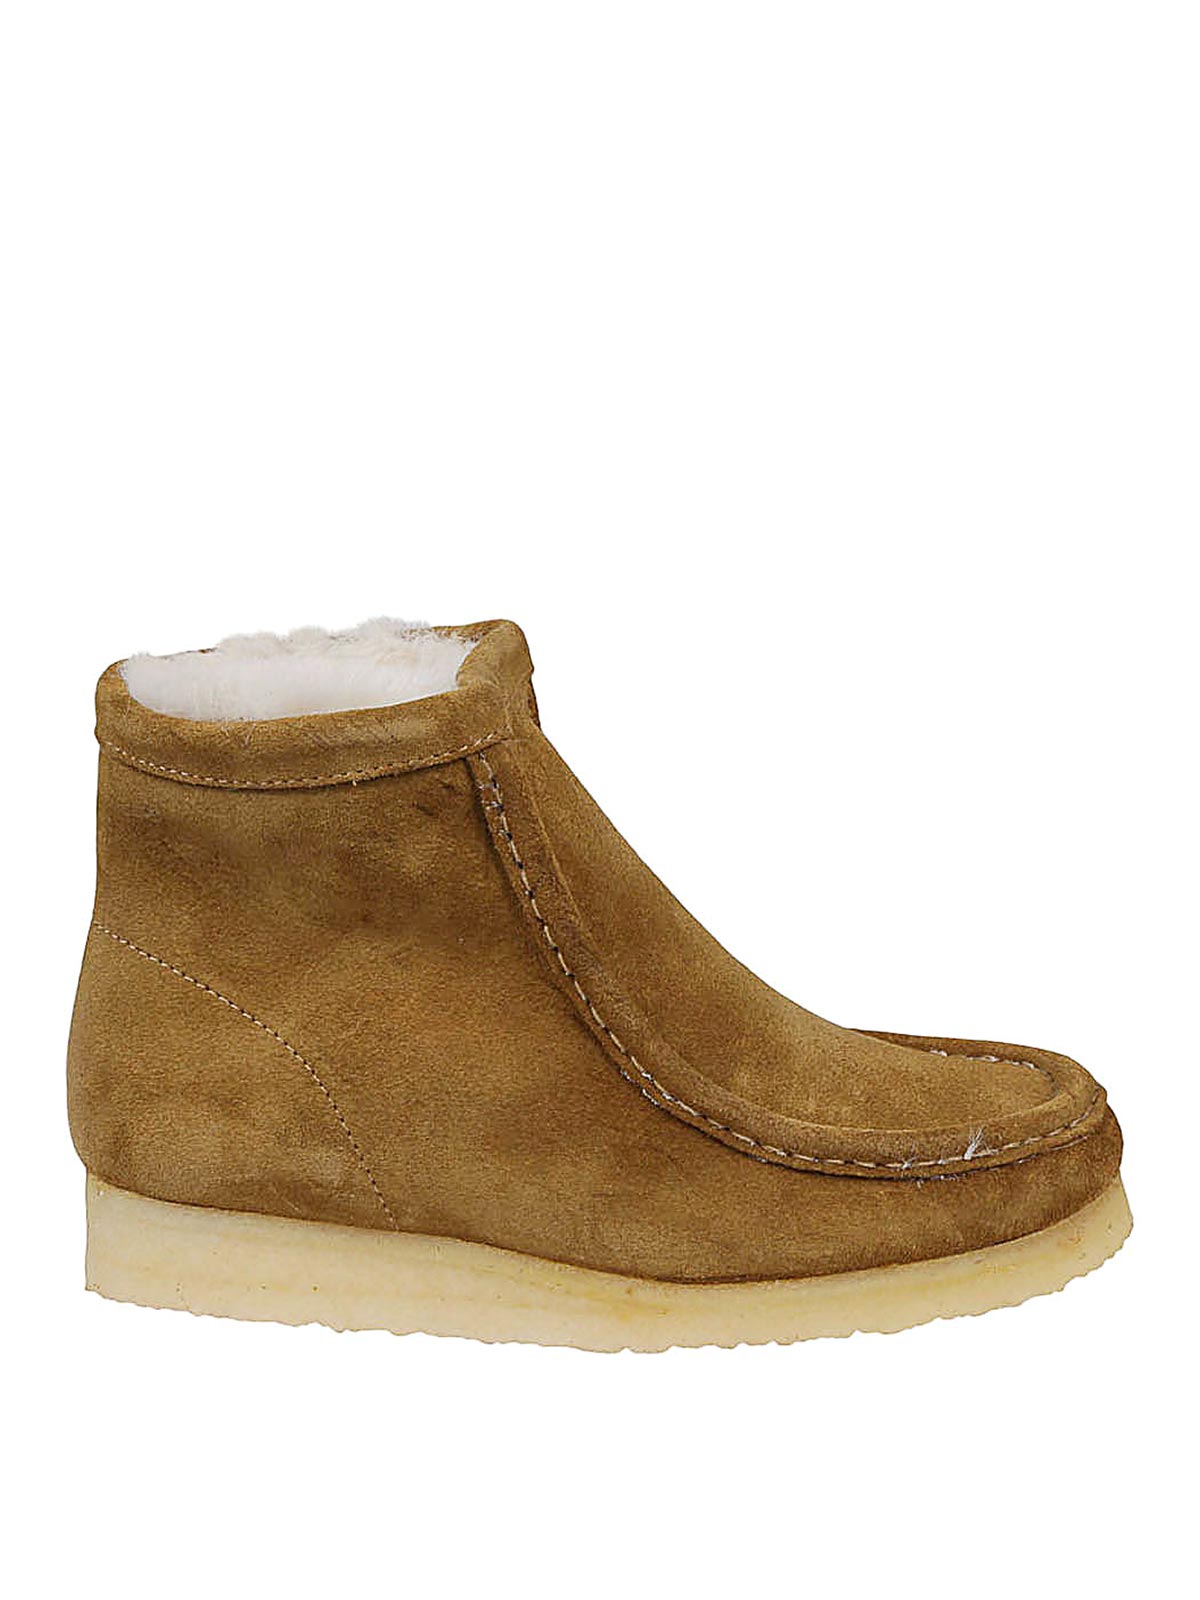 Shop Clarks Wallabee Hi Suede Leather Boots In Beige